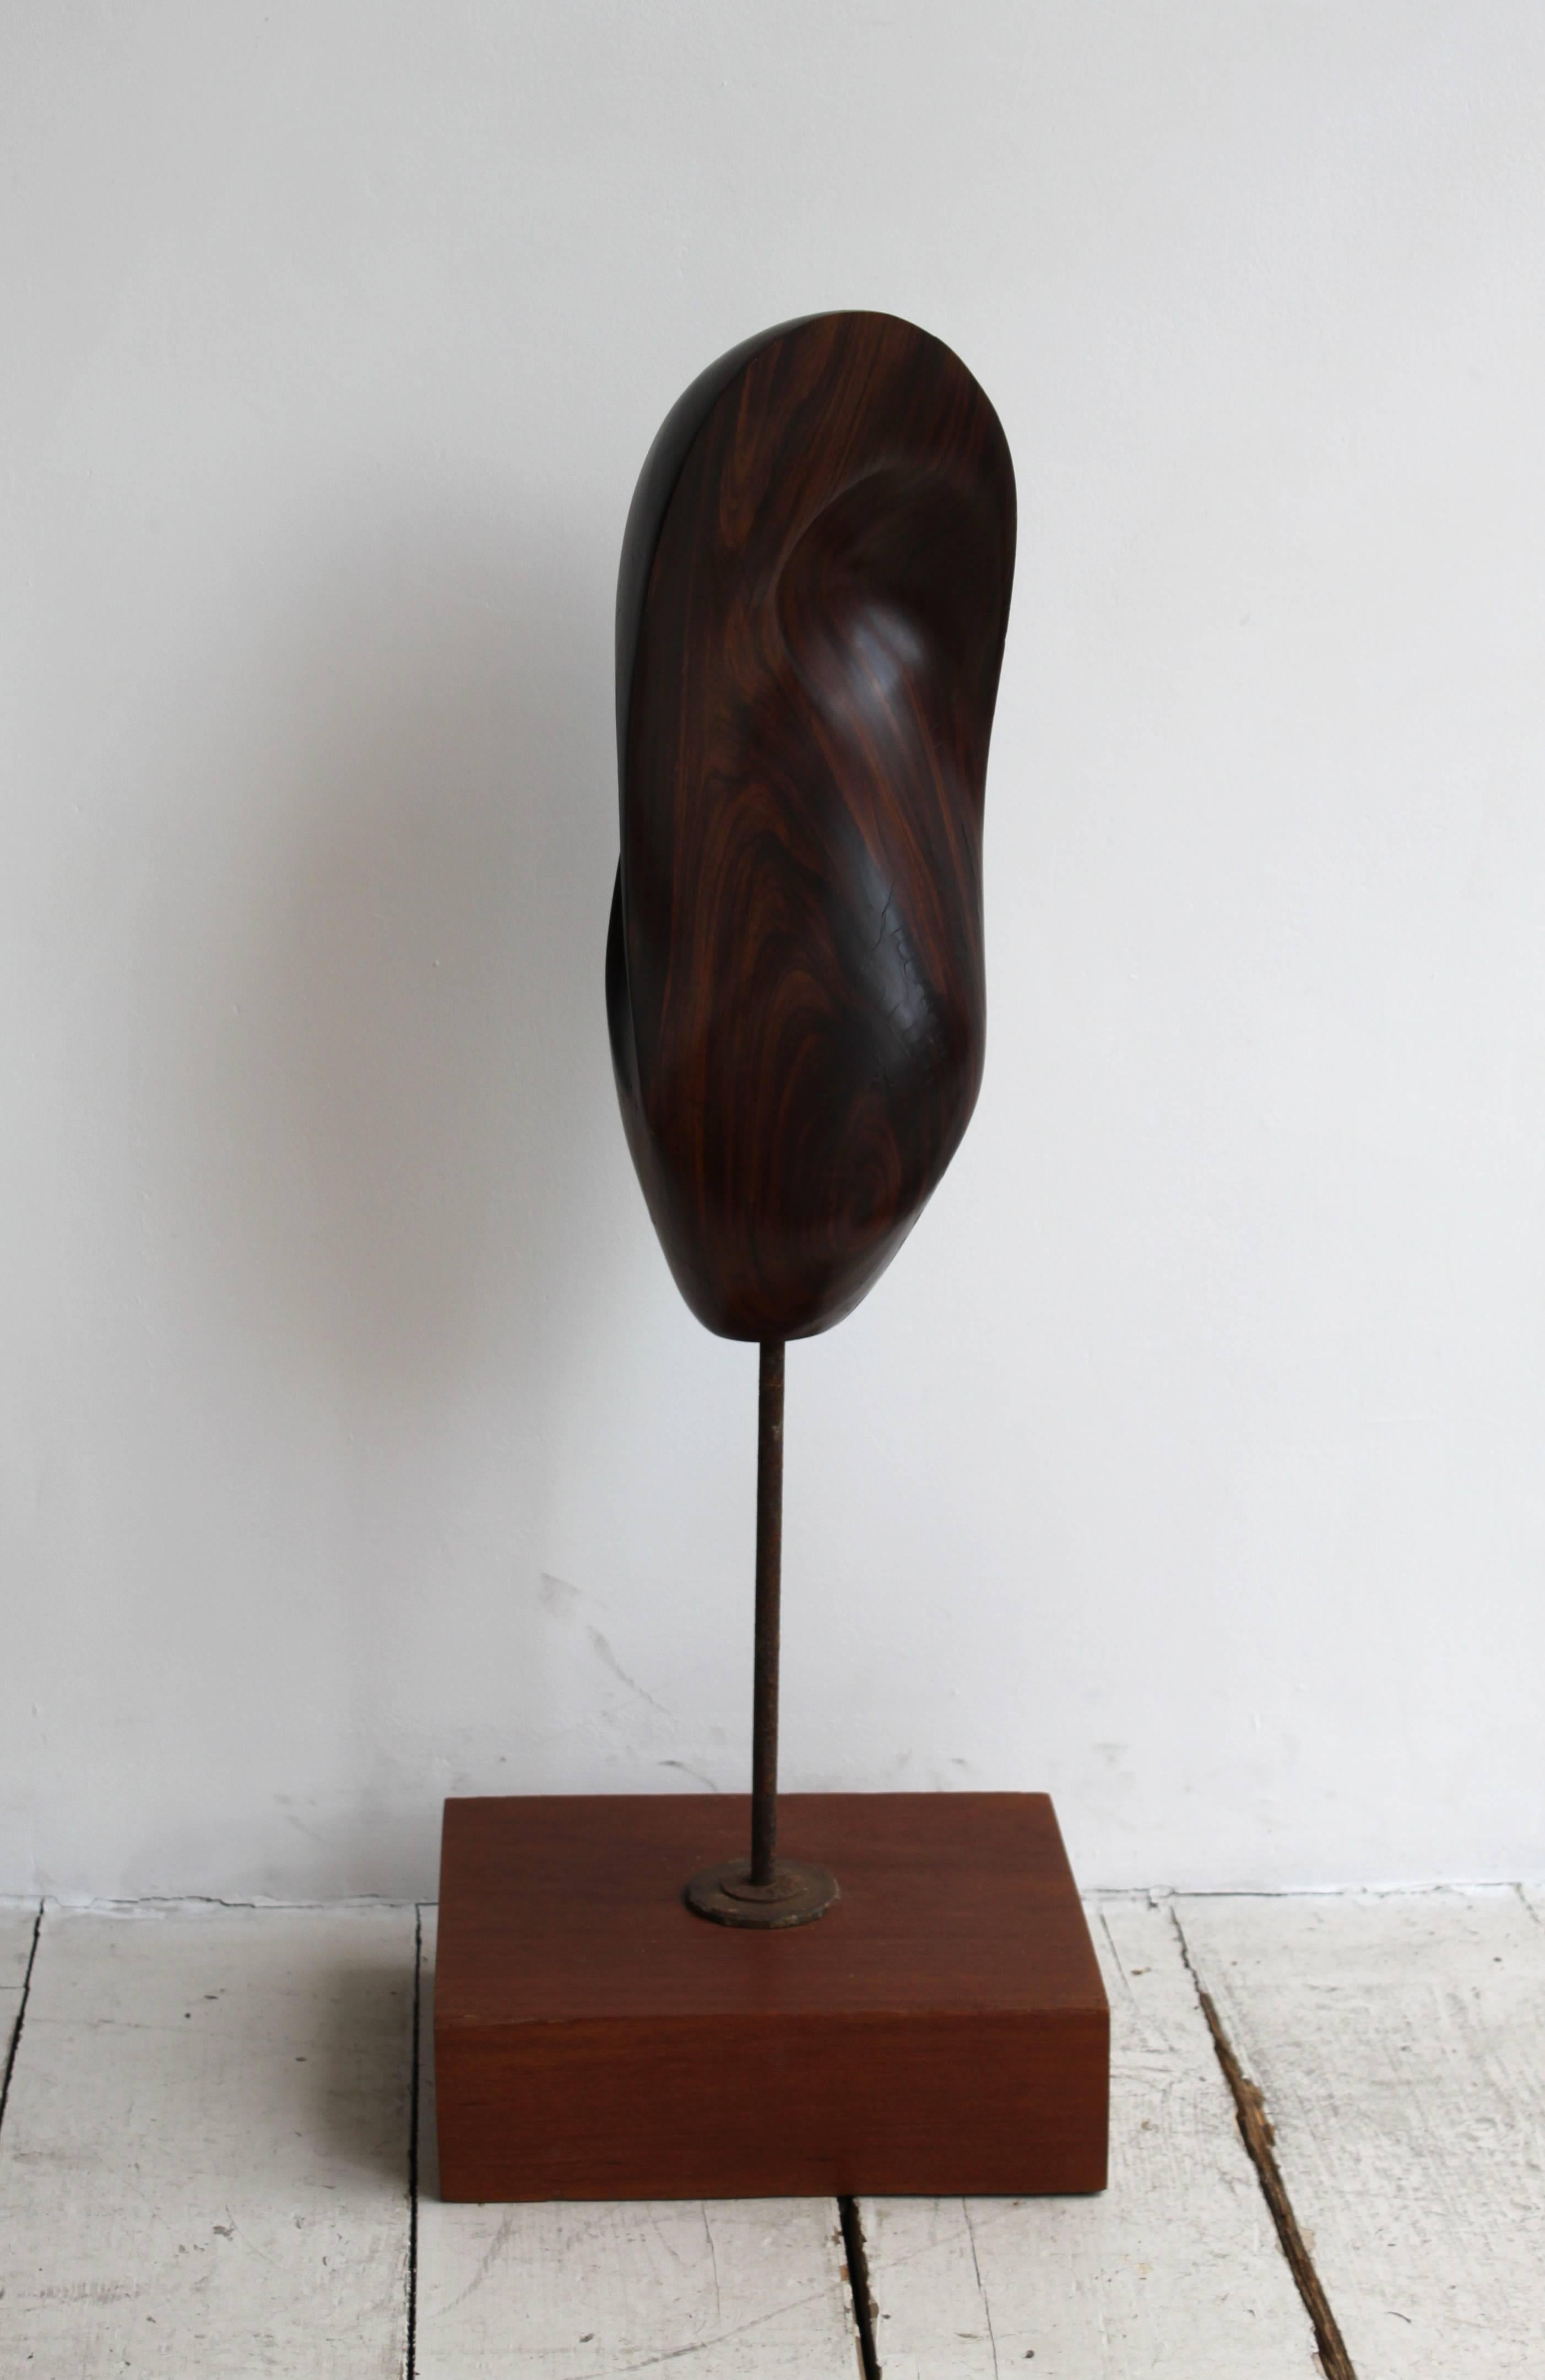 Bertram Eaton (1912-1978).
Curved and rounded form.
1960s.

Carved lignum vitae sculpture on a metal rod and wooden base.
 